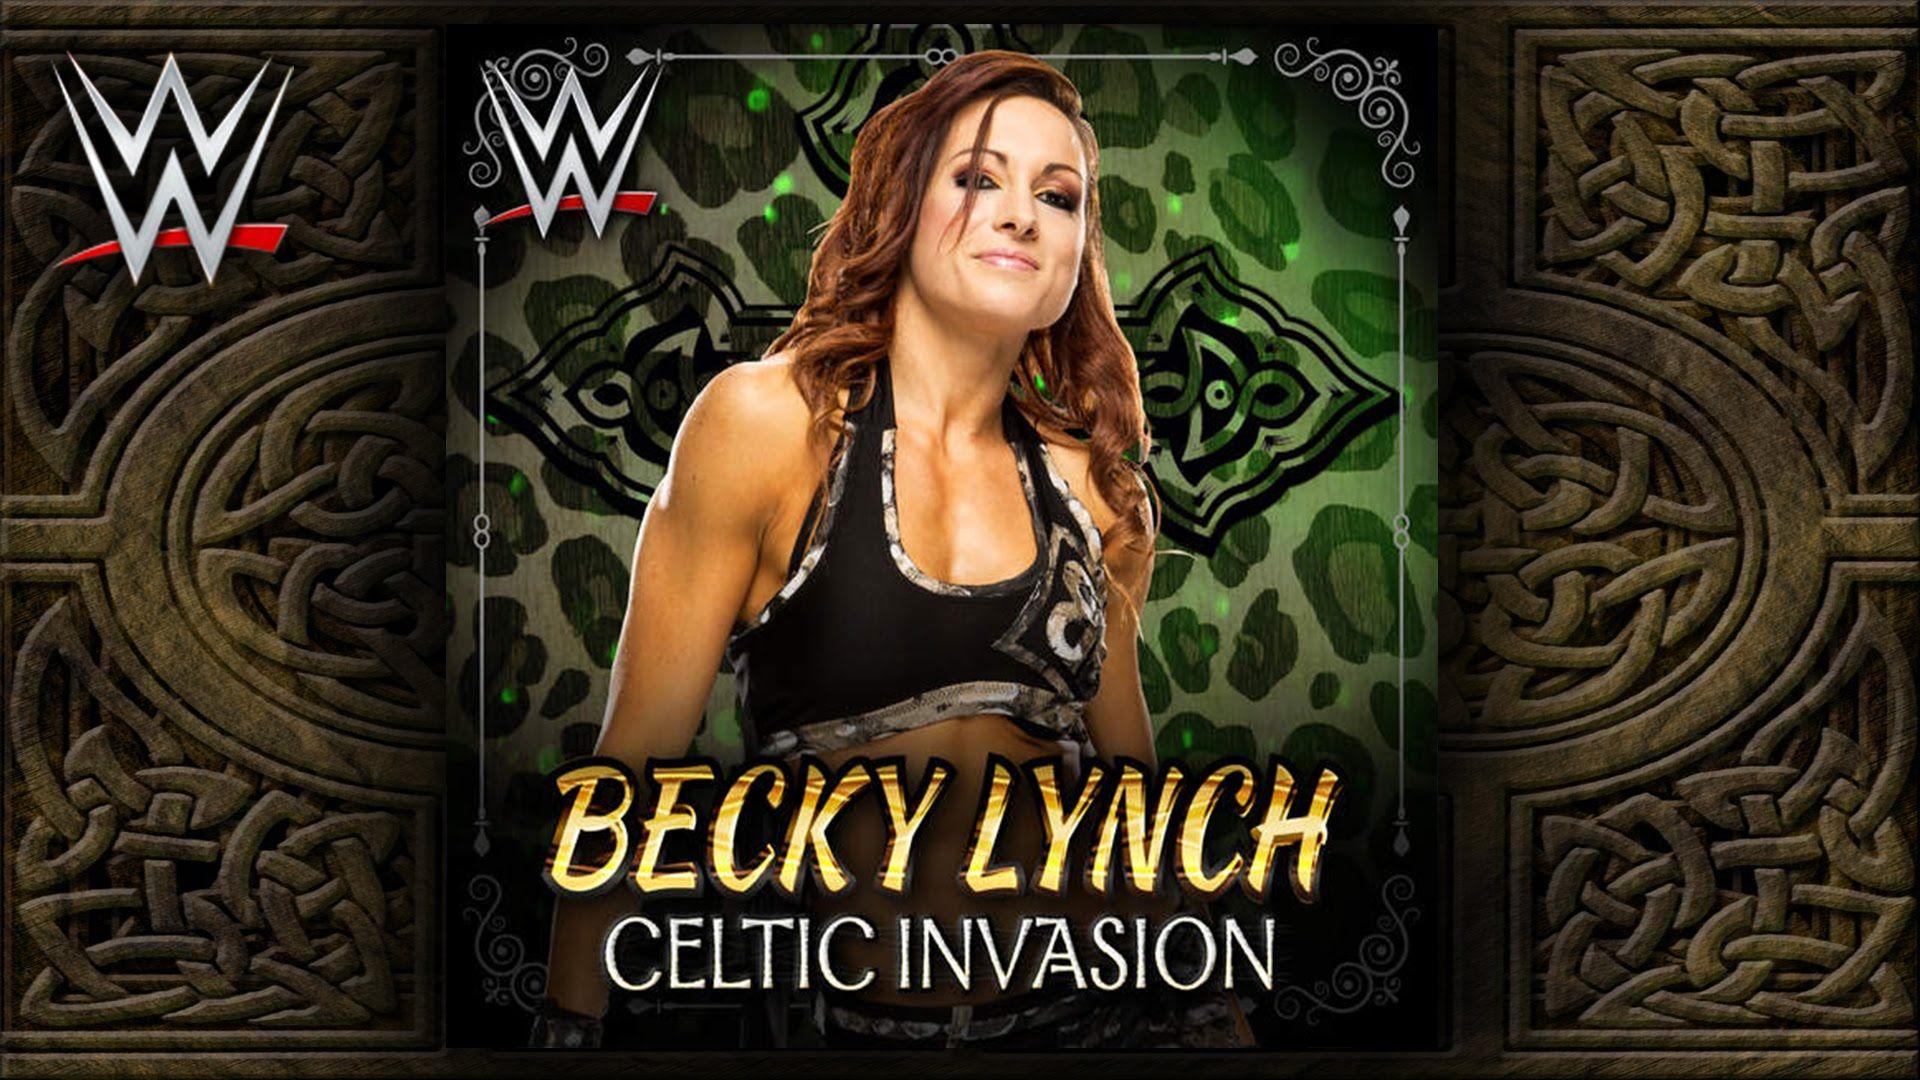 WWE NXT: Celtic Invasion (Becky Lynch) Theme Song + AE (Arena